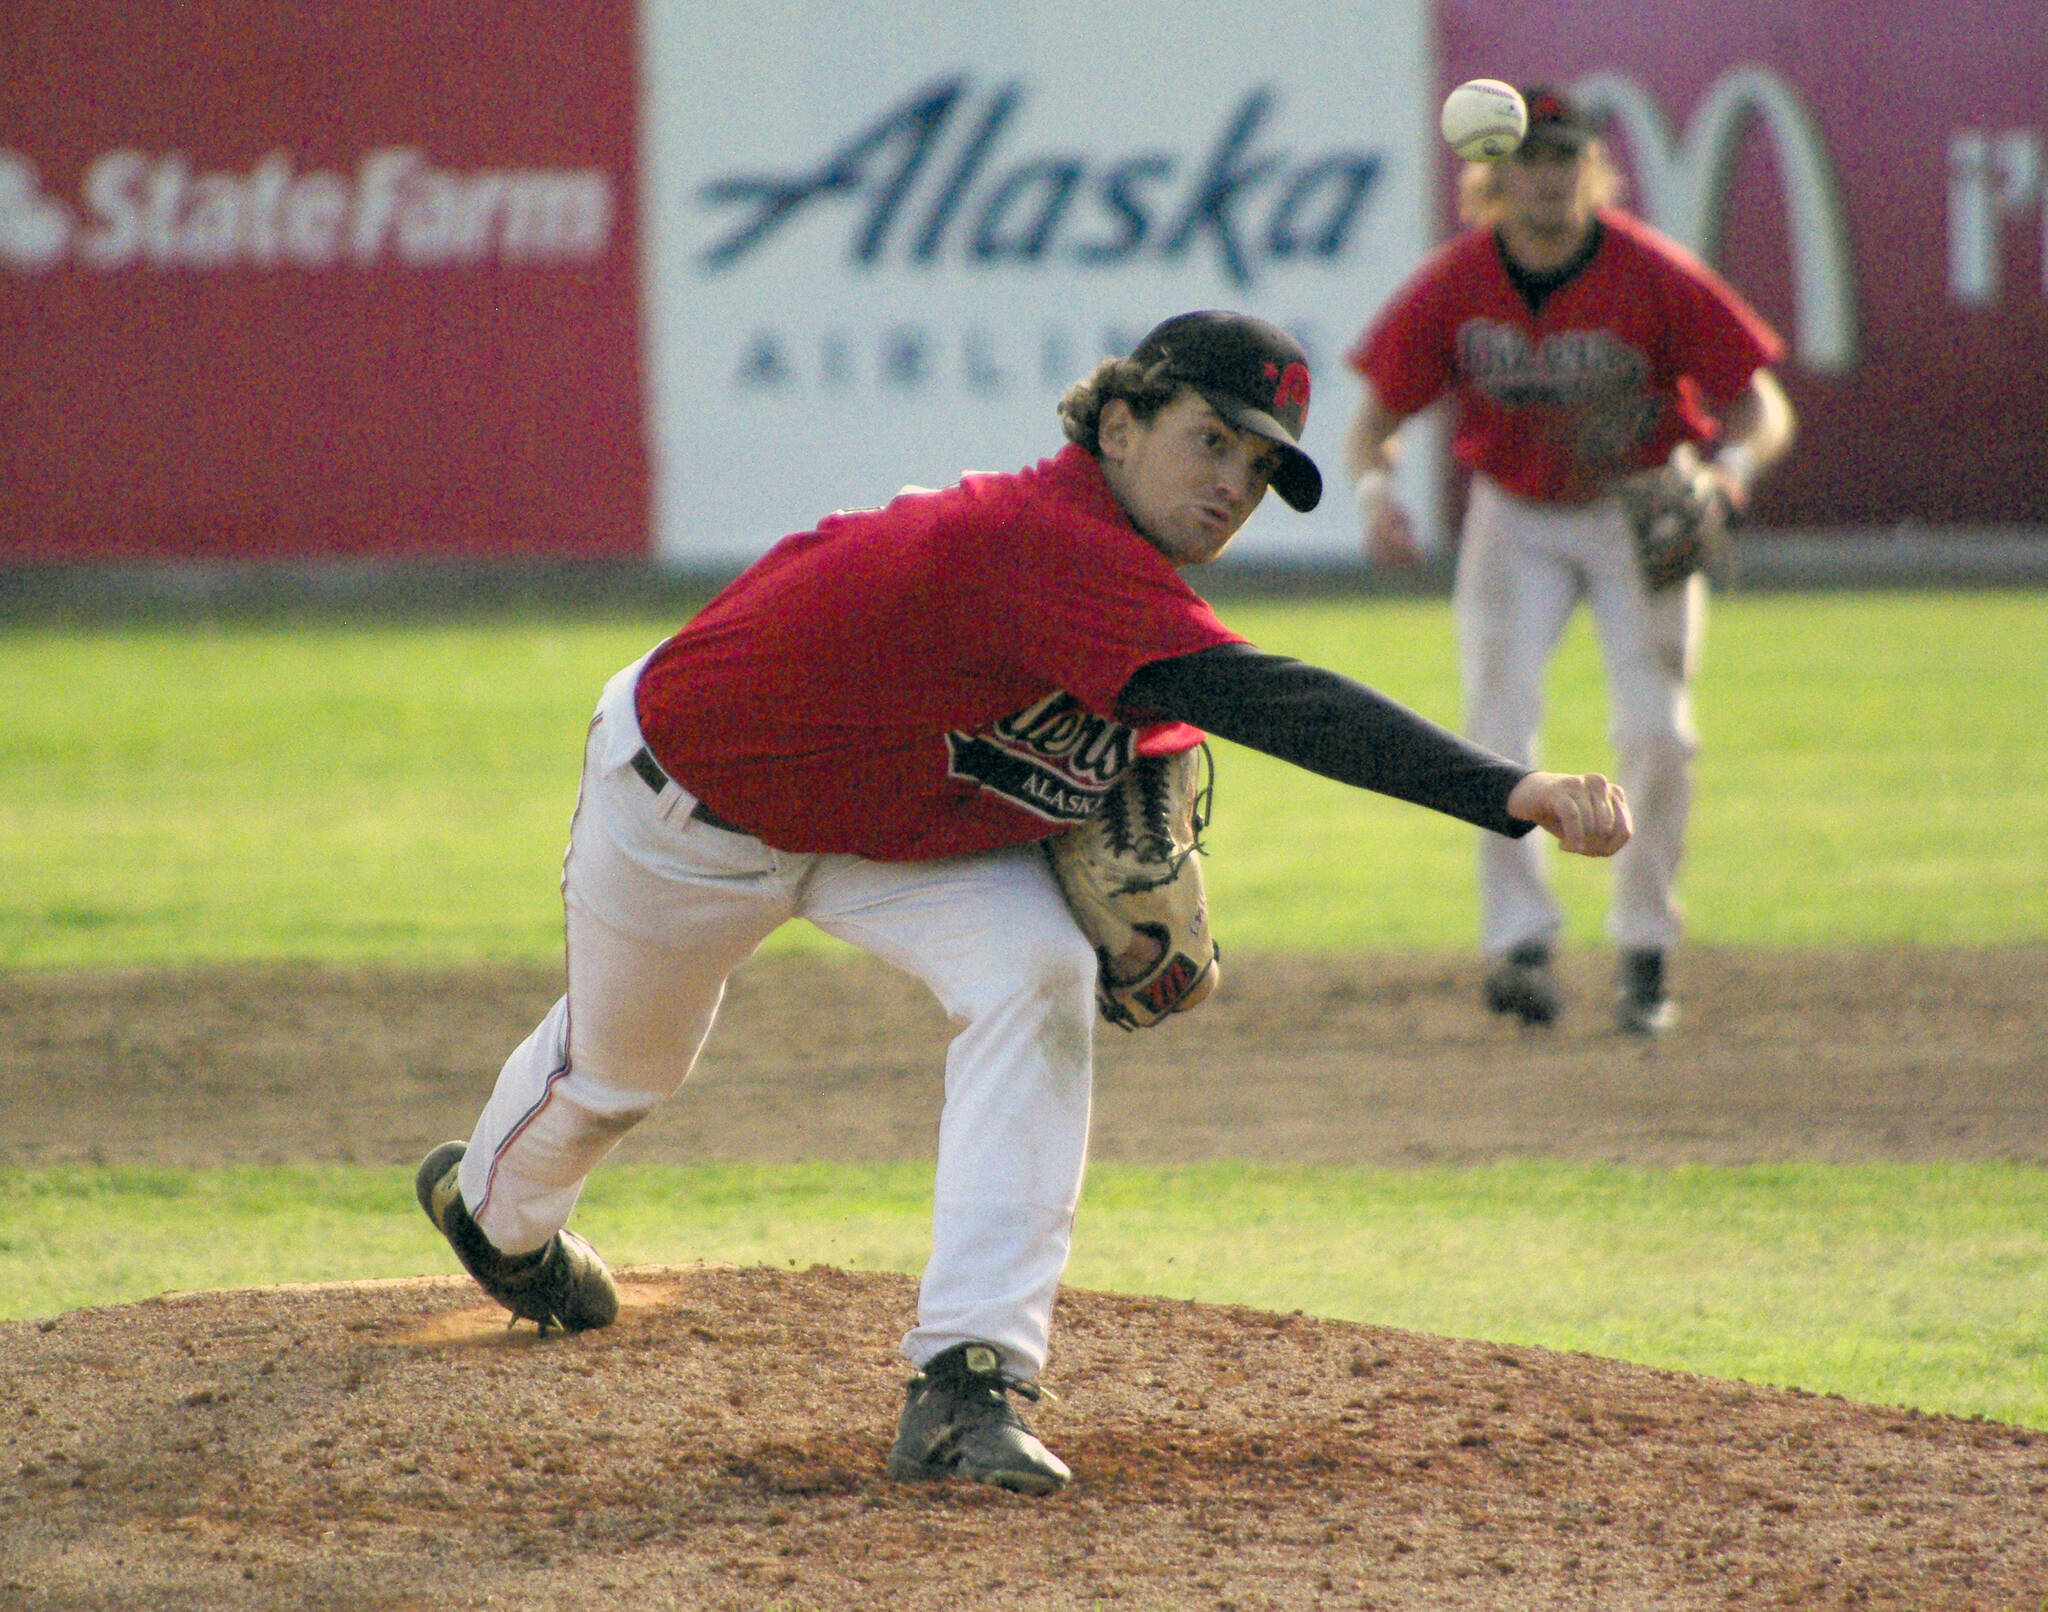 Oilers starter Conner Kershaw delivers to the Chugiak-Eagle River Chinooks on Friday, July 8, 2022, at Coral Seymour Memorial Park in Kenai, Alaska. (Photo by Jeff Helminiak/Peninsula Clarion)